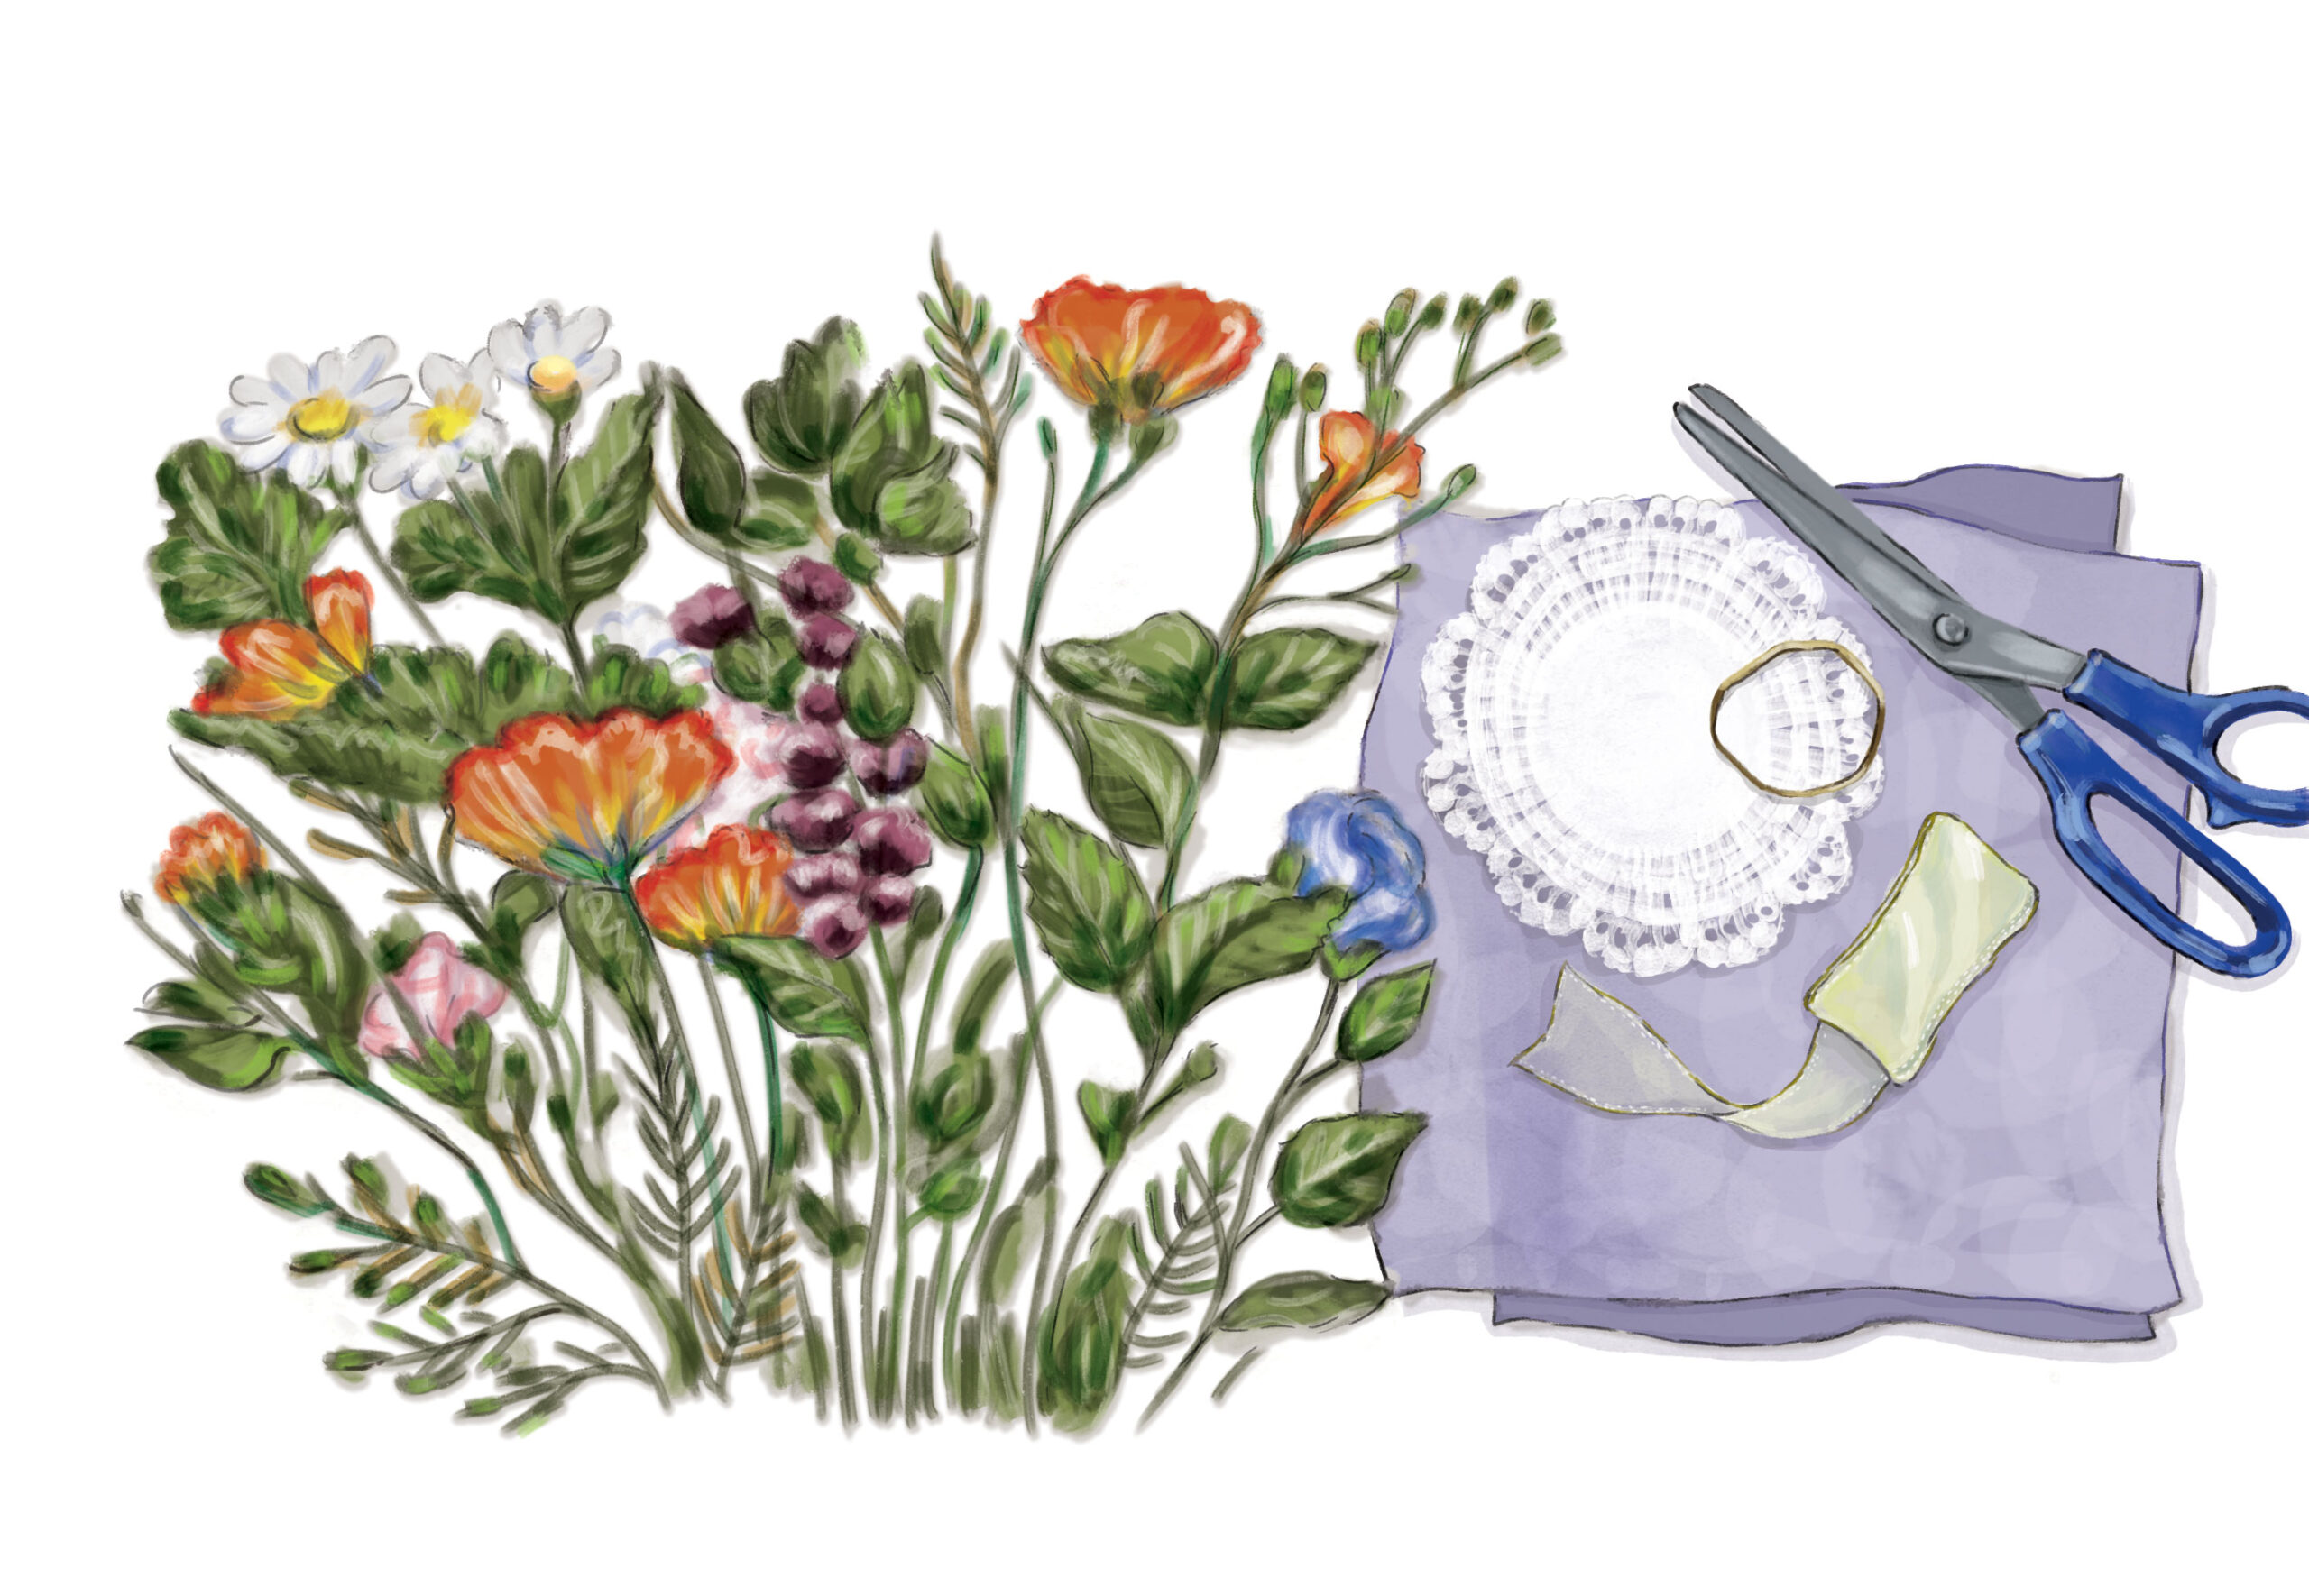 Illustration of flowers and craft materials.